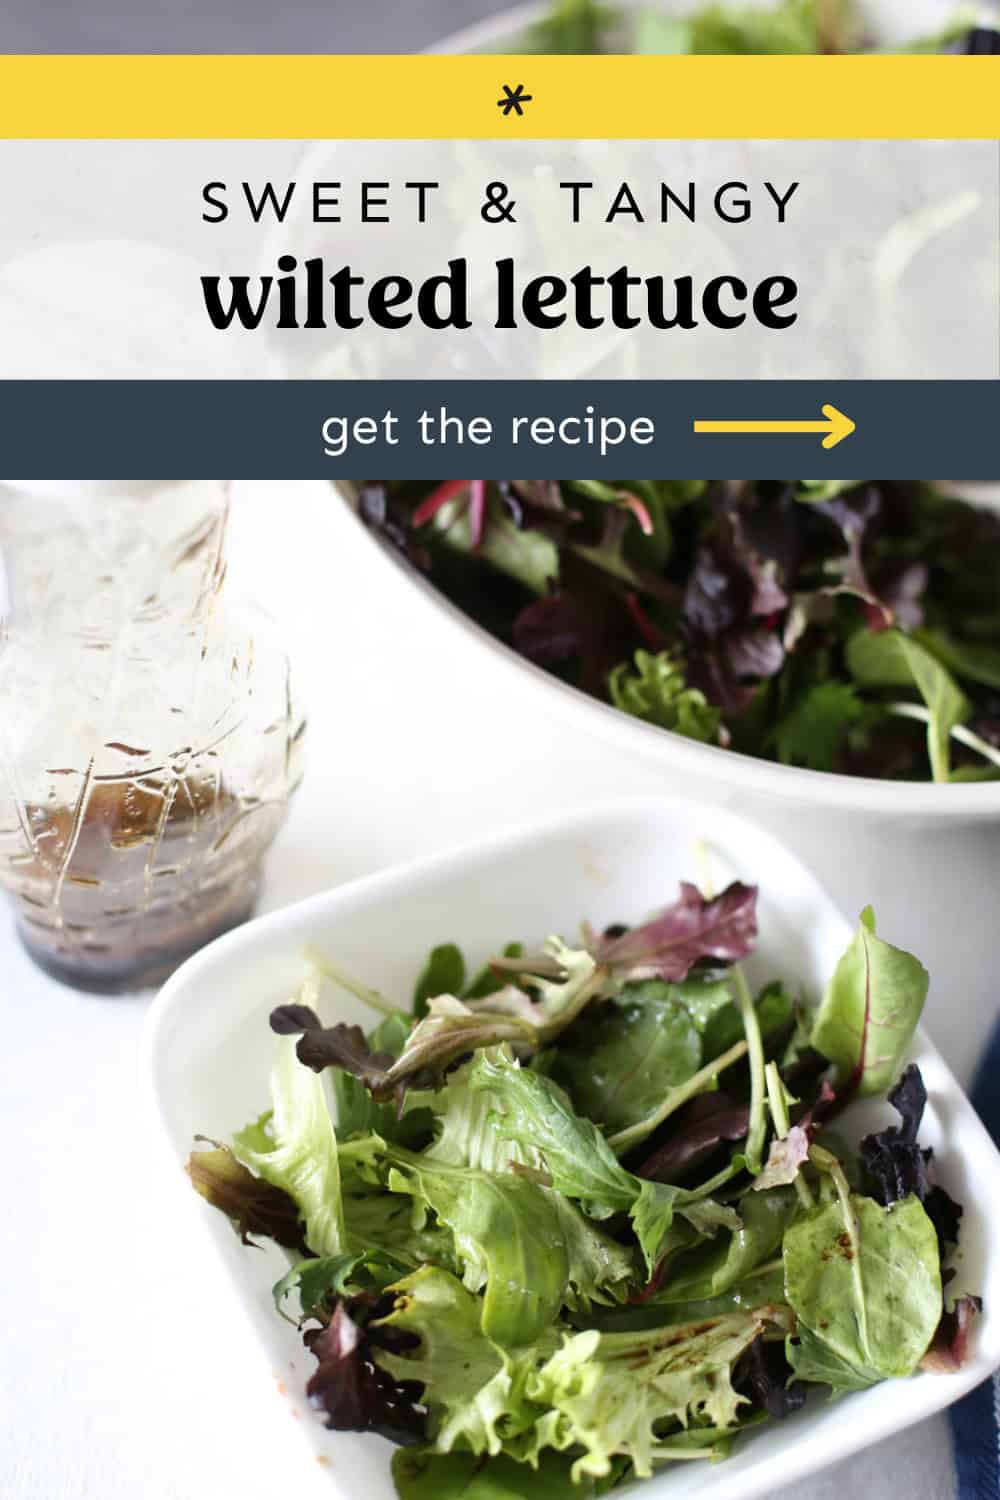 Wilted lettuce salad in a bowl with a jar of dressing next to it.